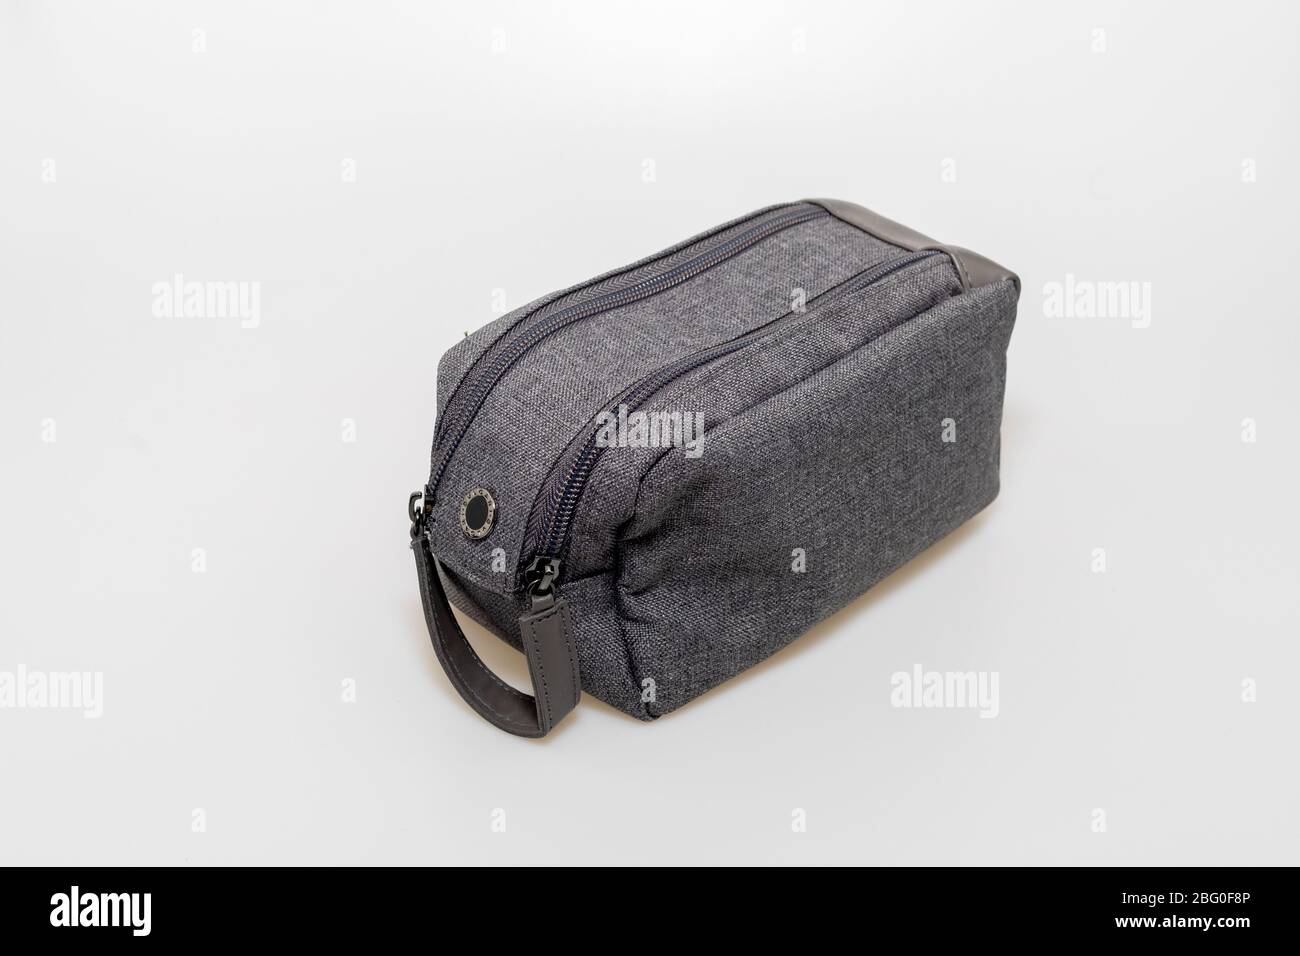 Emirates Airlines, Business Class, Amenity bag Stock Photo - Alamy